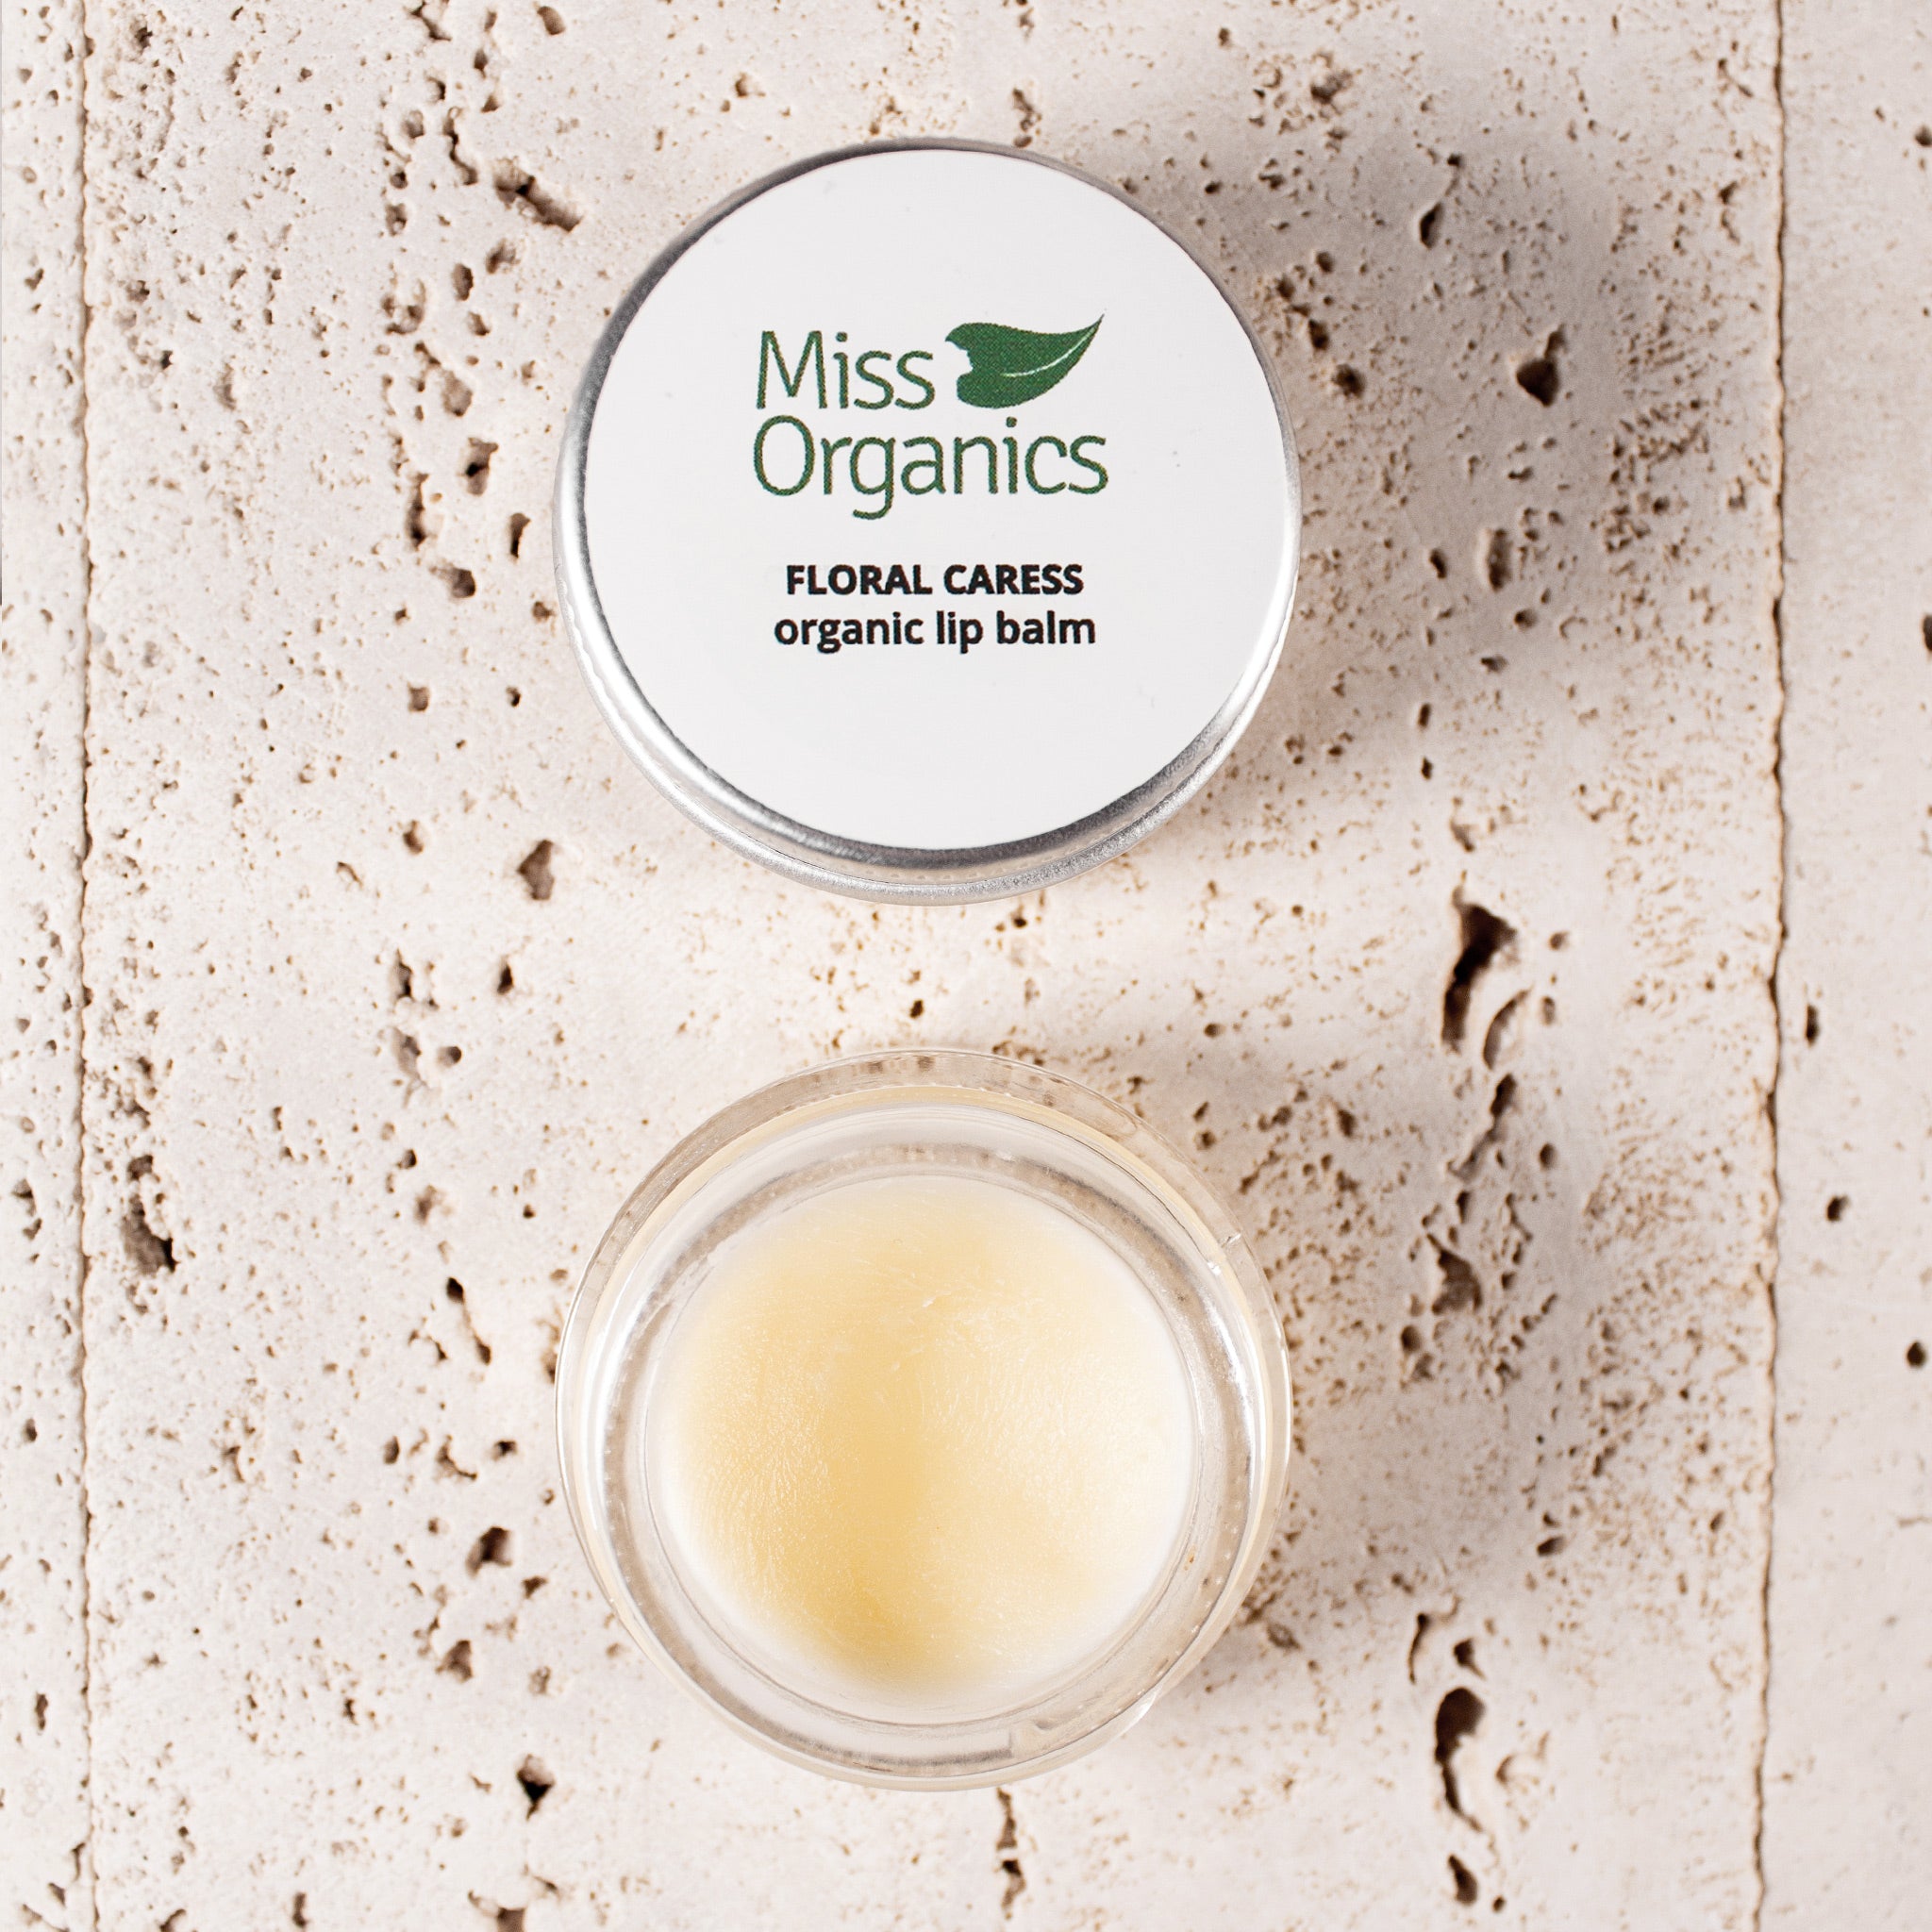 Floral Caress organic lip balm in glass pot on stone background